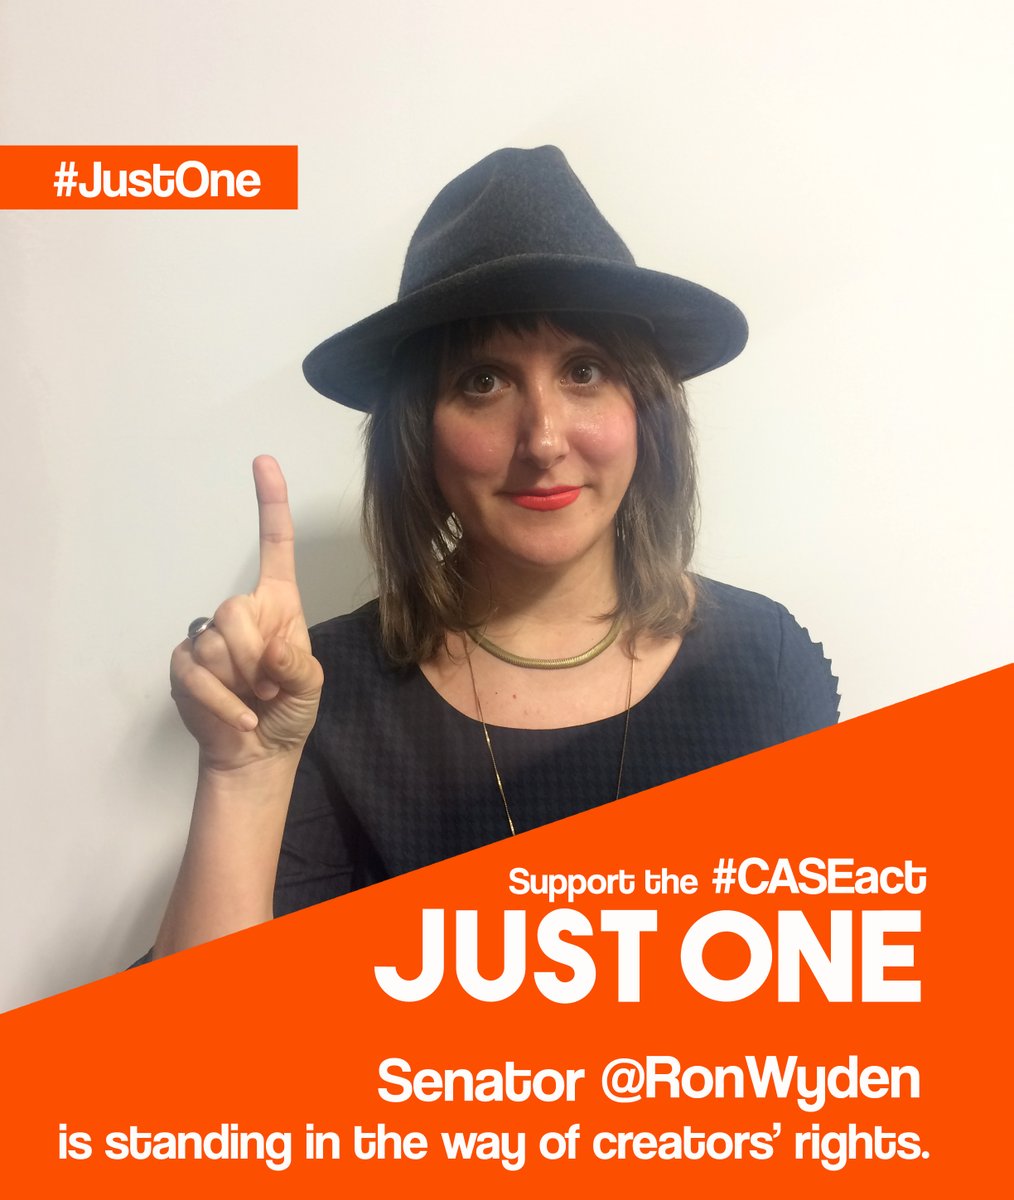 Creators like @kmaroonfoto need the #CASEAct, a Bill that would provide a practical way to combat infringement. #JustOne senator has managed to halt it in its tracks. Contact Sen. @RonWyden at 202-224-5244 and urge him to lift his hold today. #MySkillsPayBills #StandCreative